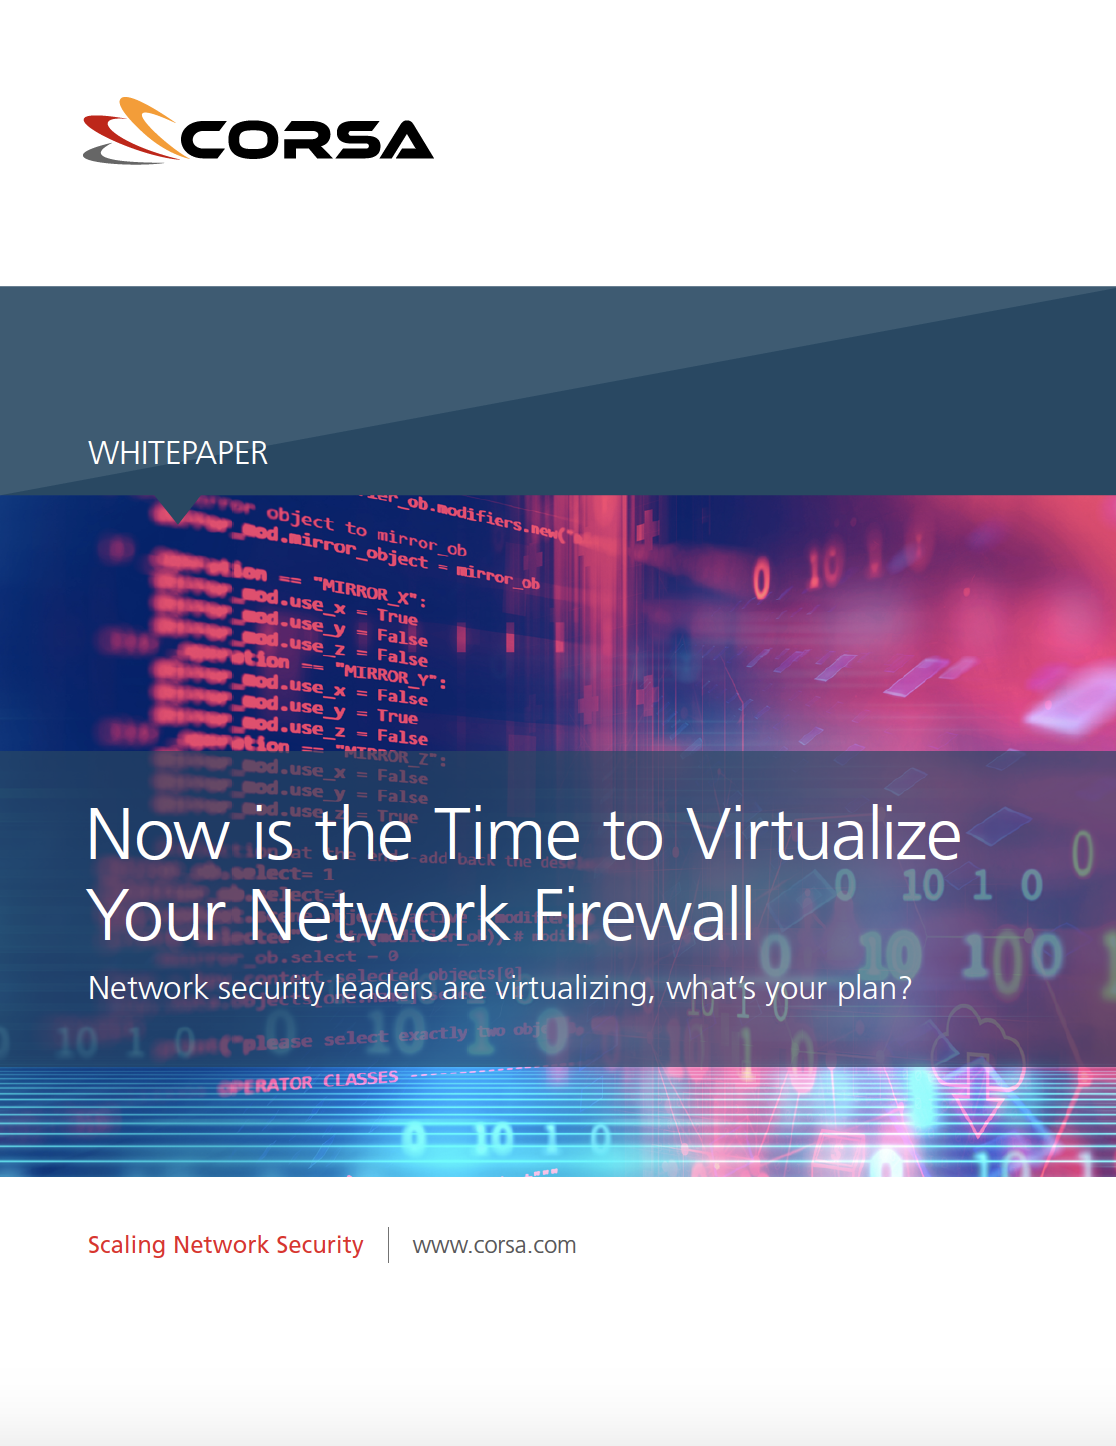 Corsa_WP-Time_to_Virtualize_Your_Network_Firewall-cover-big